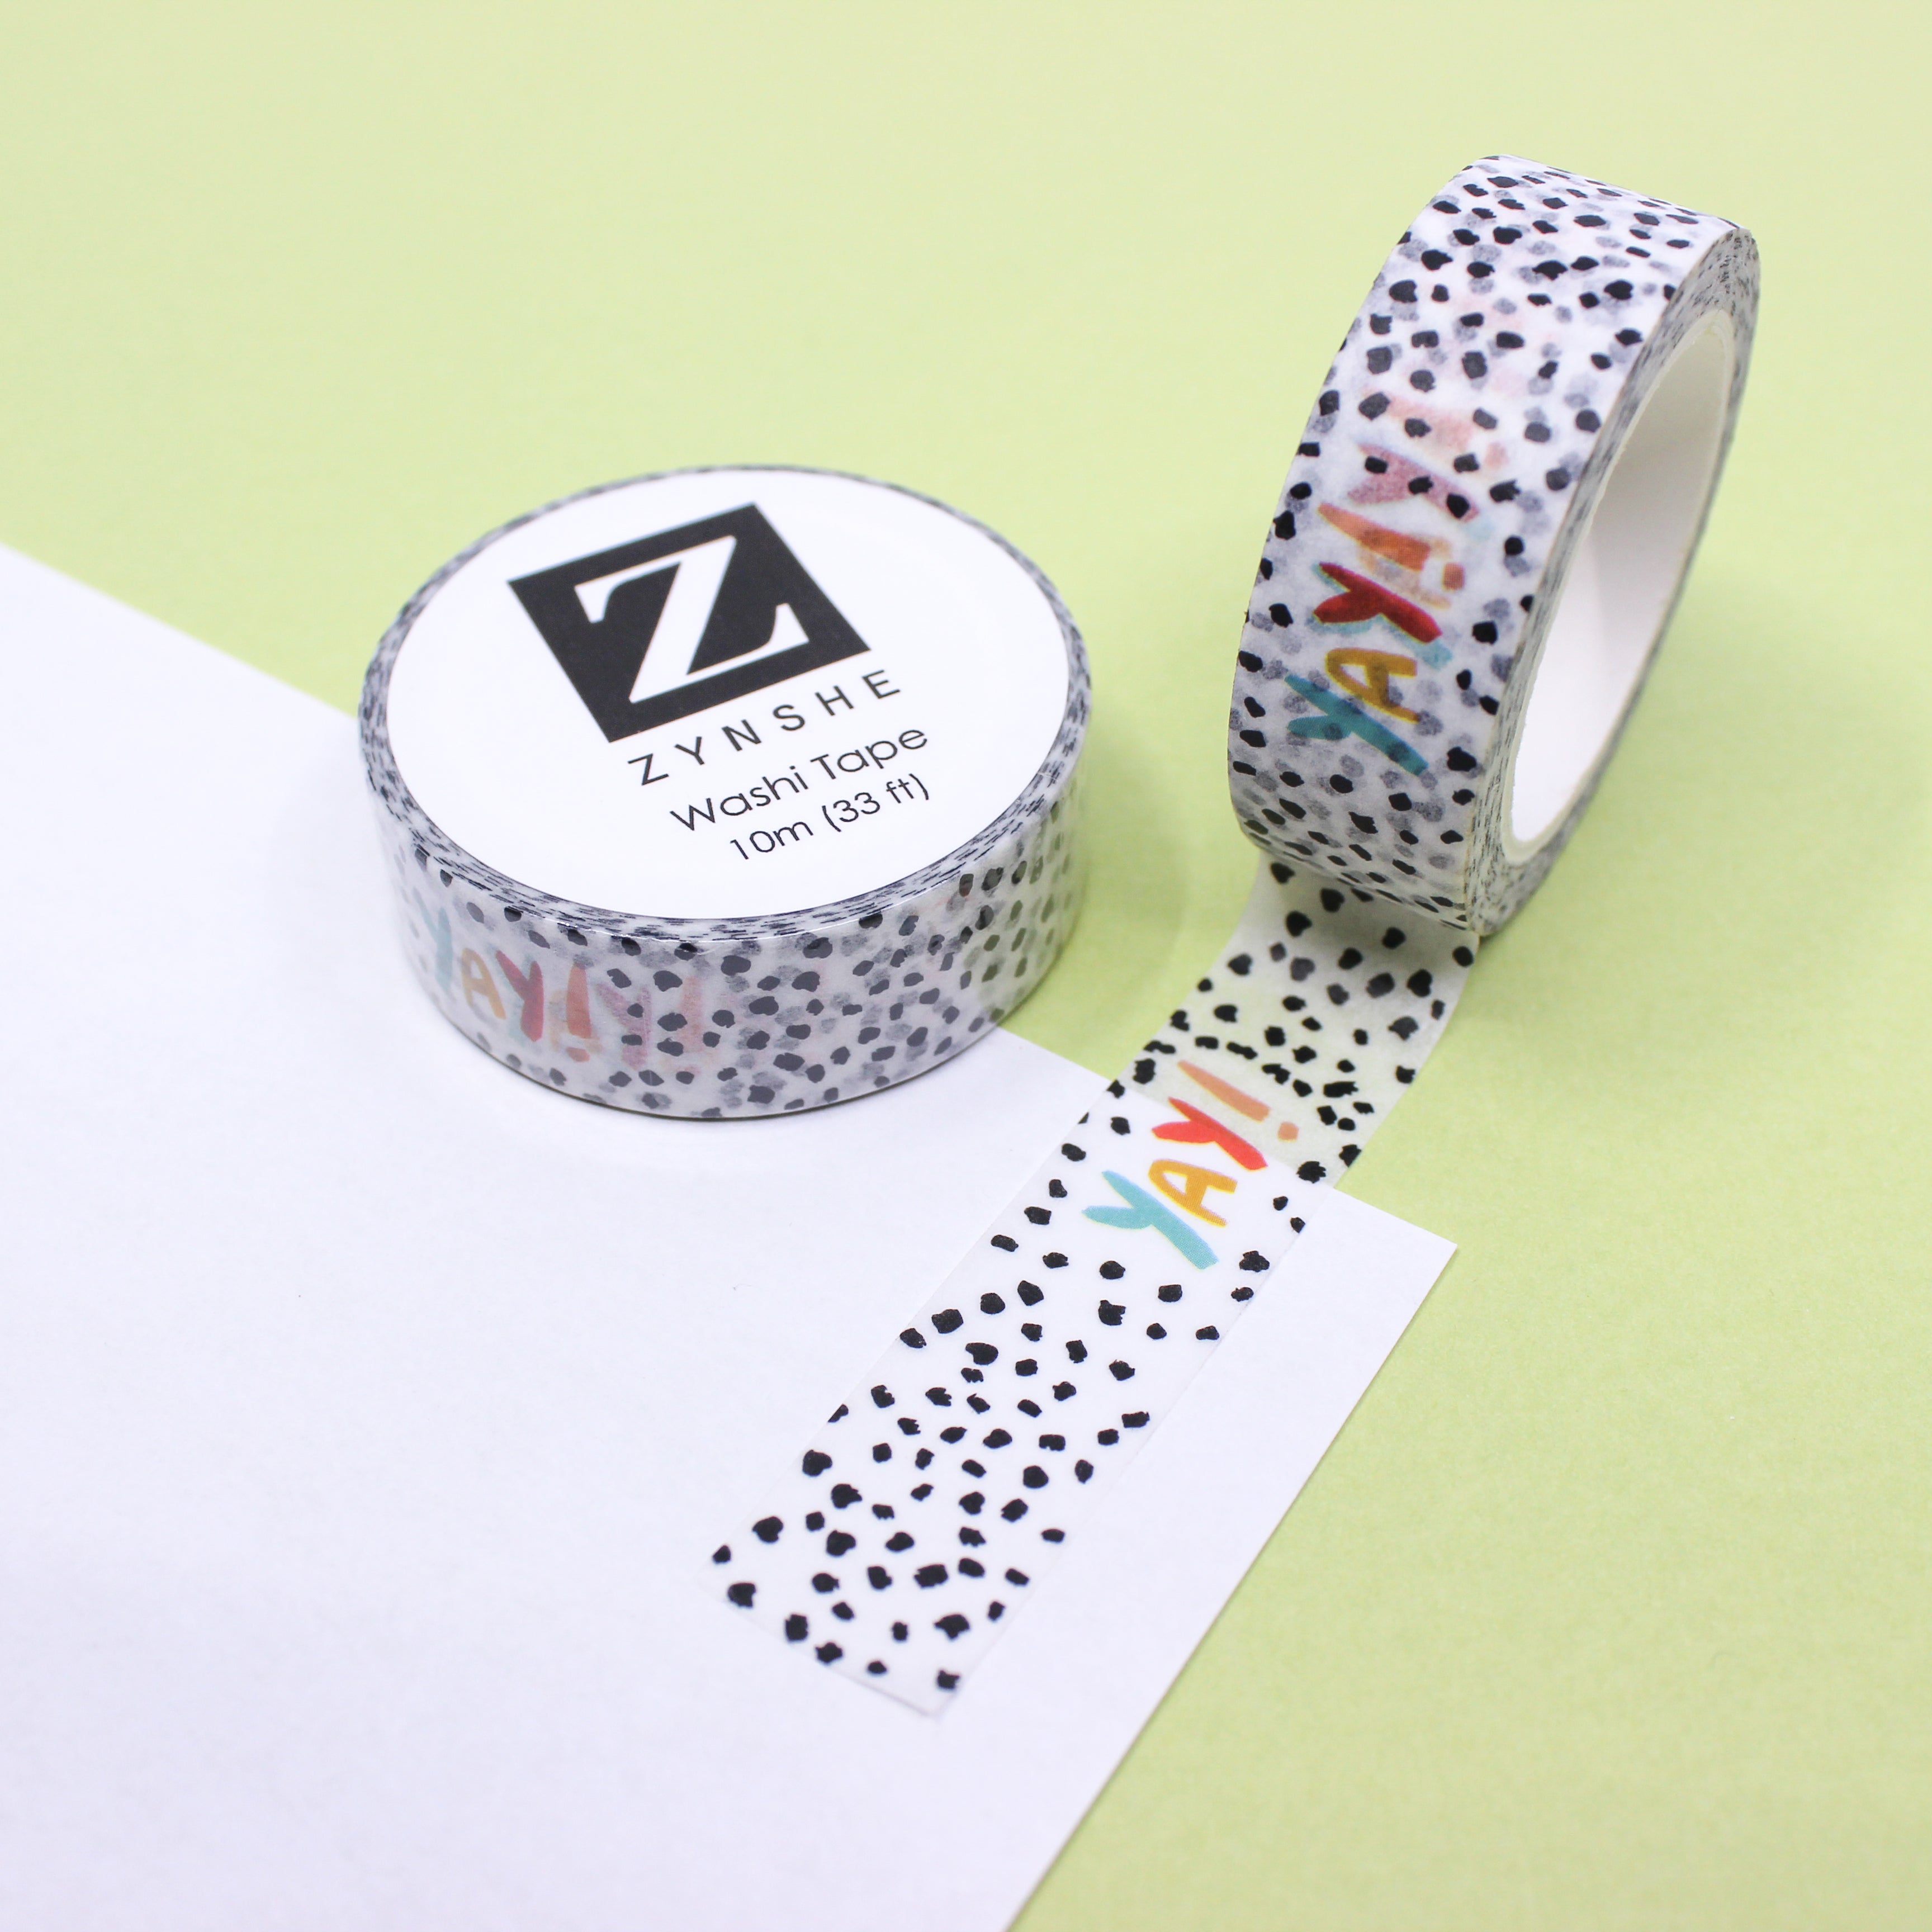 This is a fun and colorful YAY! Text washi tape on a black and white speckled background from BBB Supplies Craft Shop and created by Zynshe.